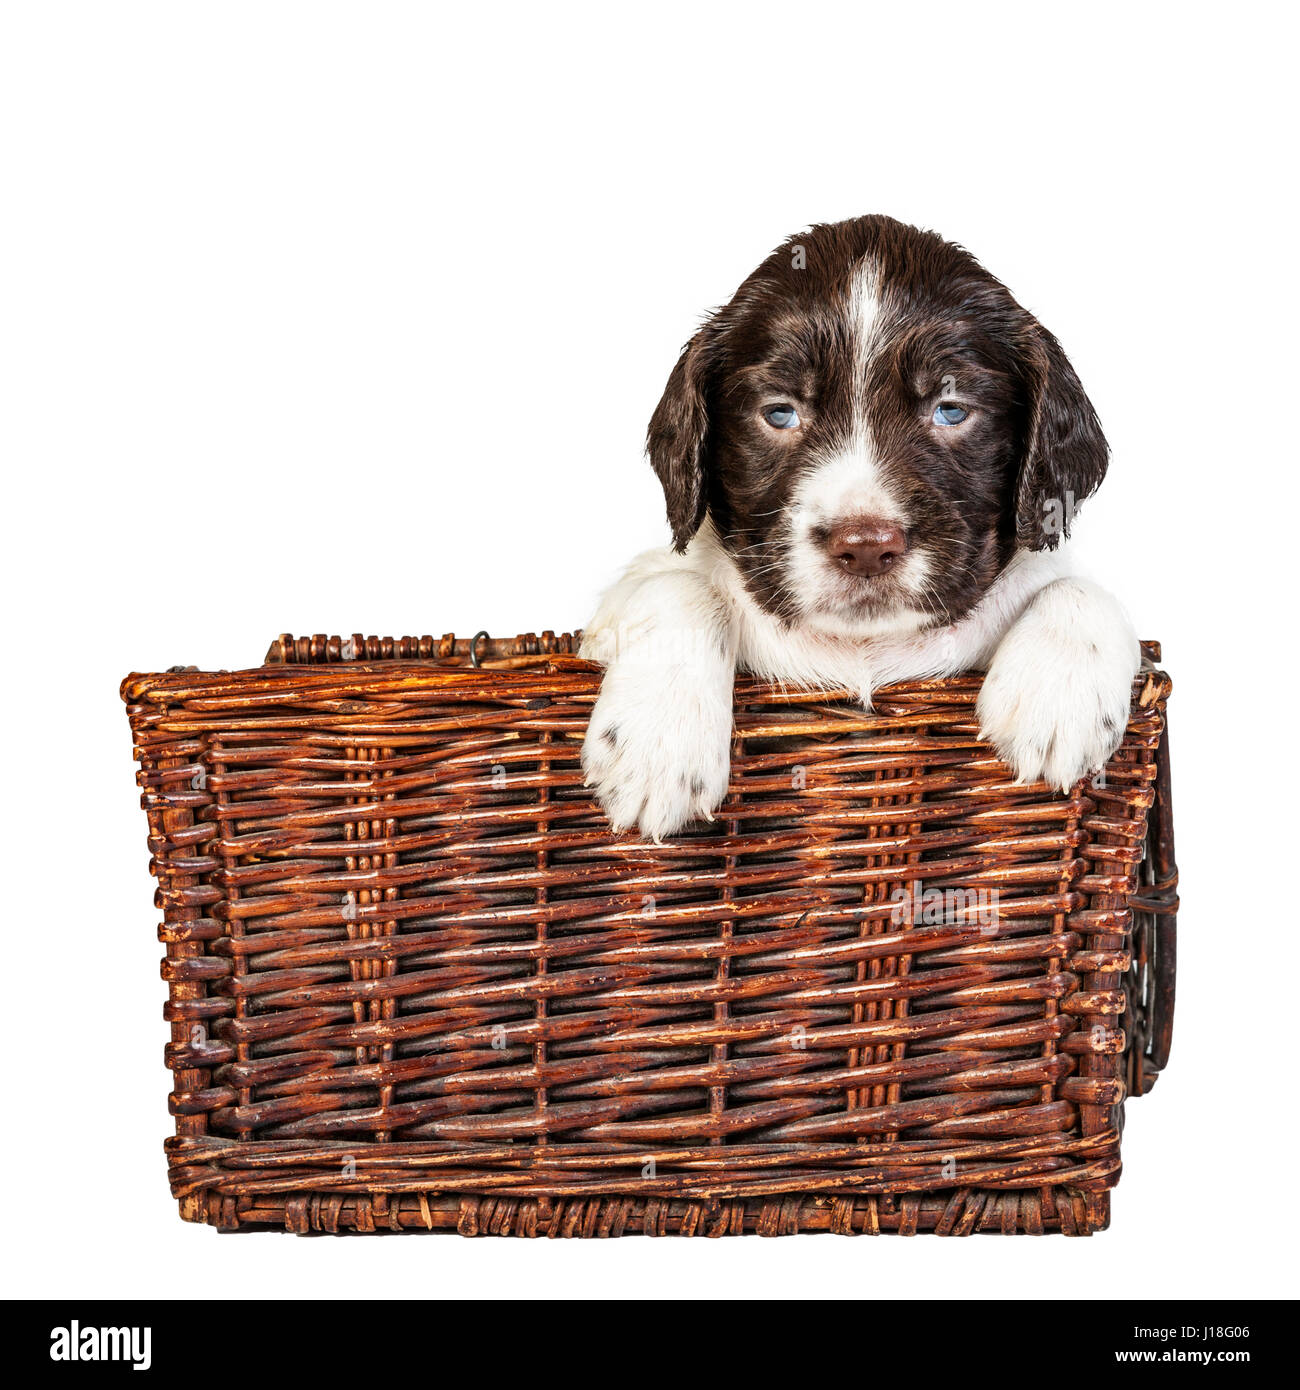 A 4 week old liver and white English Springer Spaniel puppy in a wicker basket Stock Photo